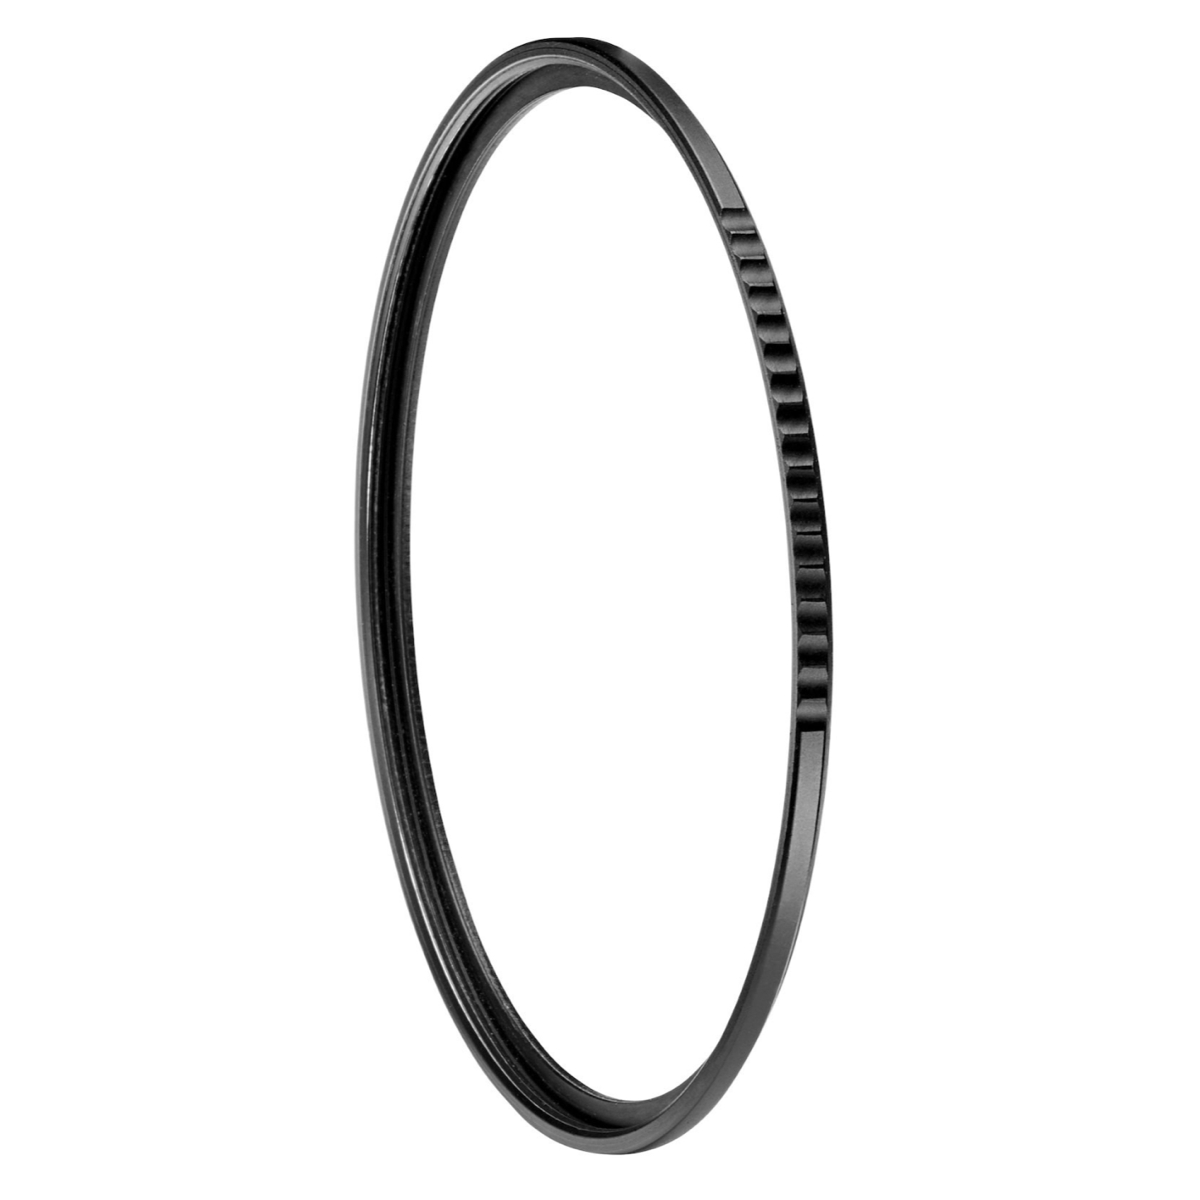 Manfrotto XUME 52mm Filter Adapter